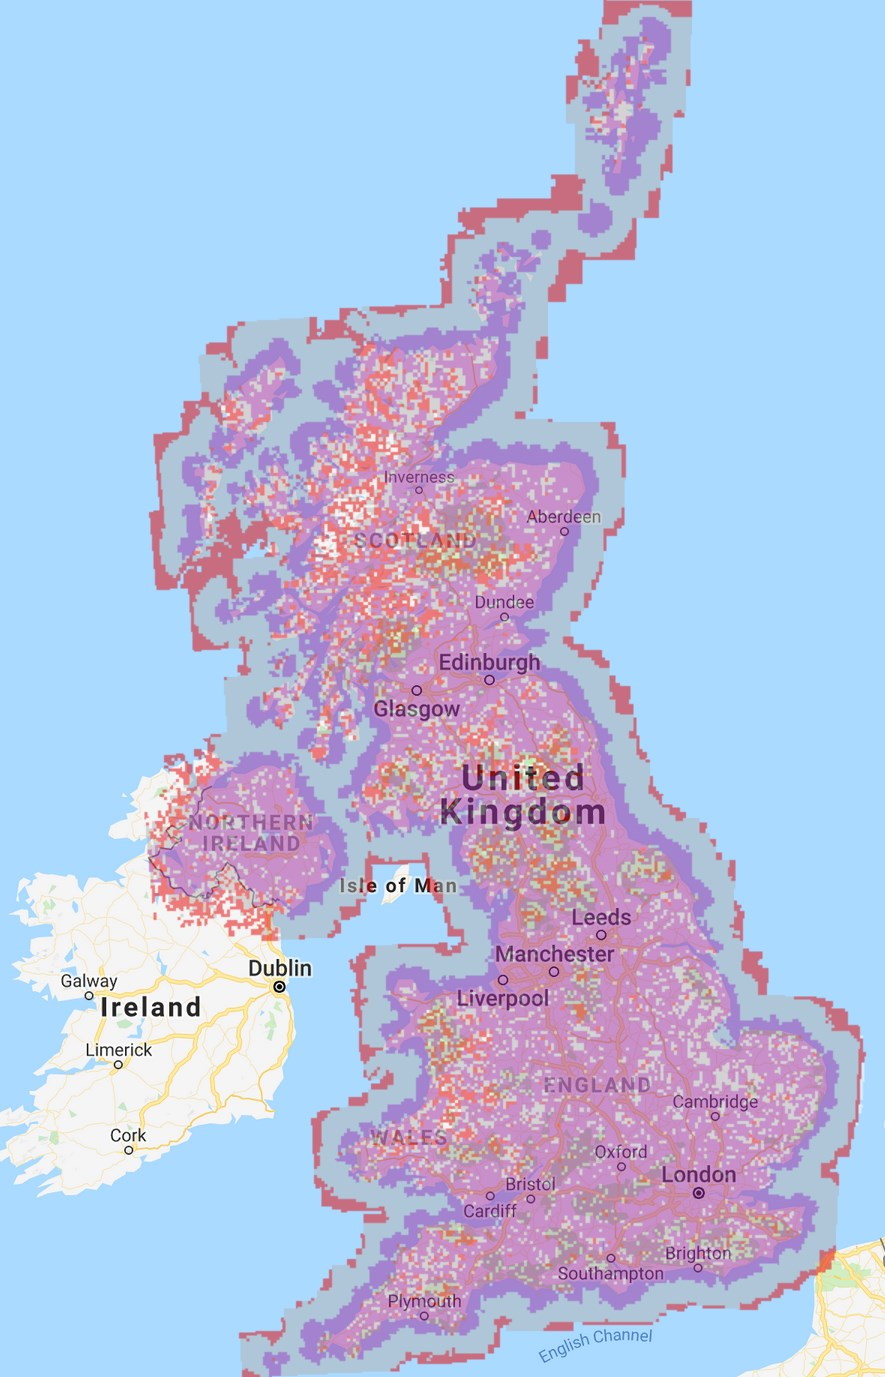 Phone Coverage In My Area Lebara Mobile Uk Coverage: 4G & 5G Network Coverage Map